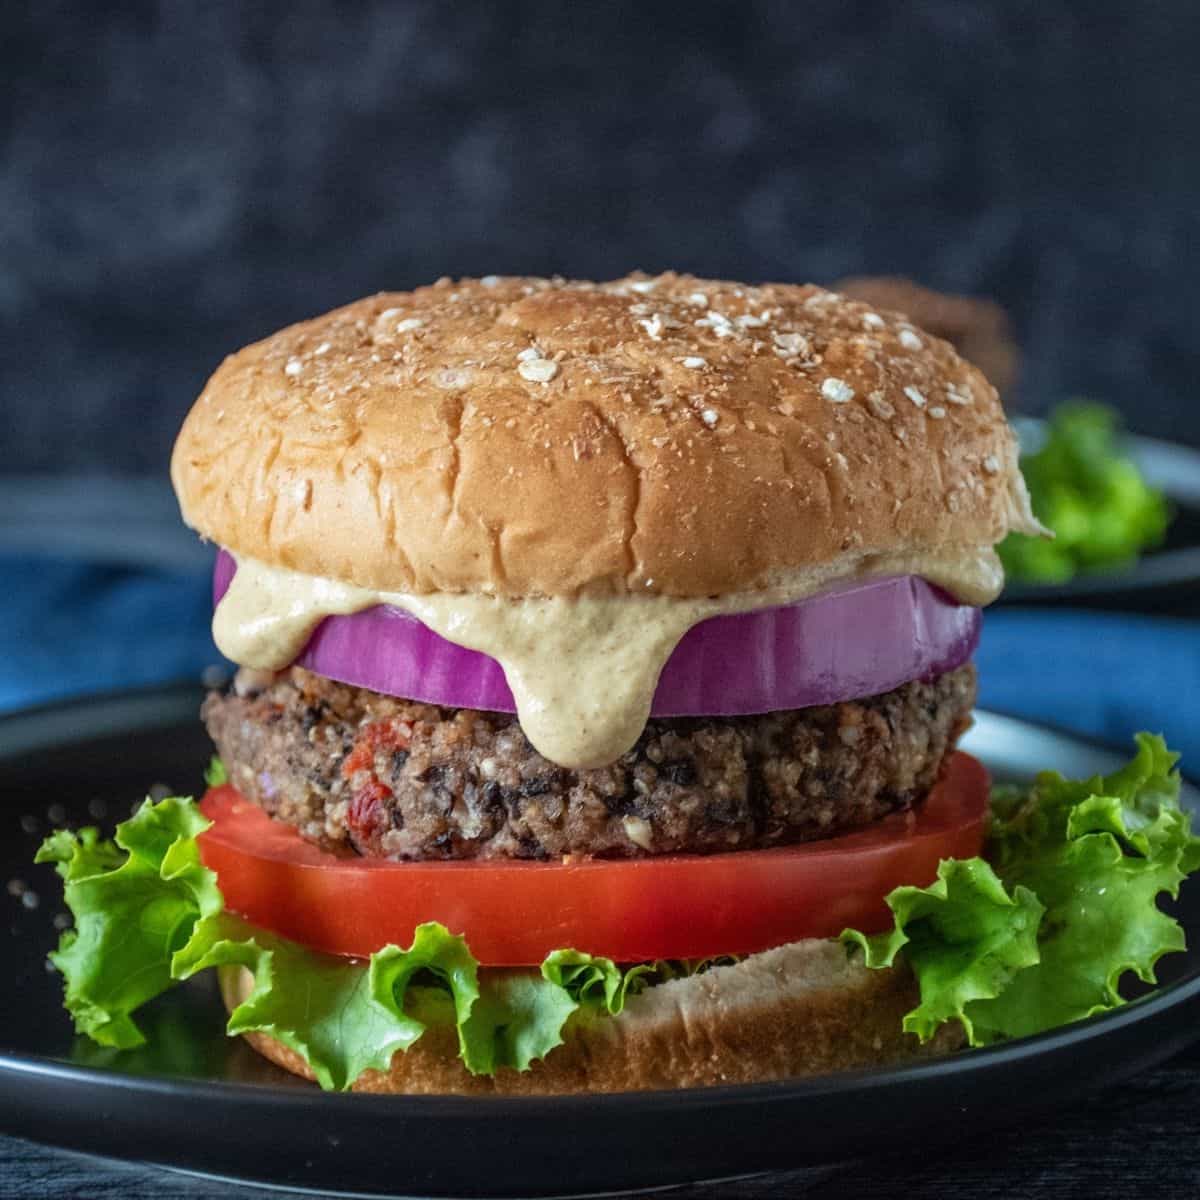 Bean burger on a bun, with onions, tomatoes, lettuce and sauce dripping out.